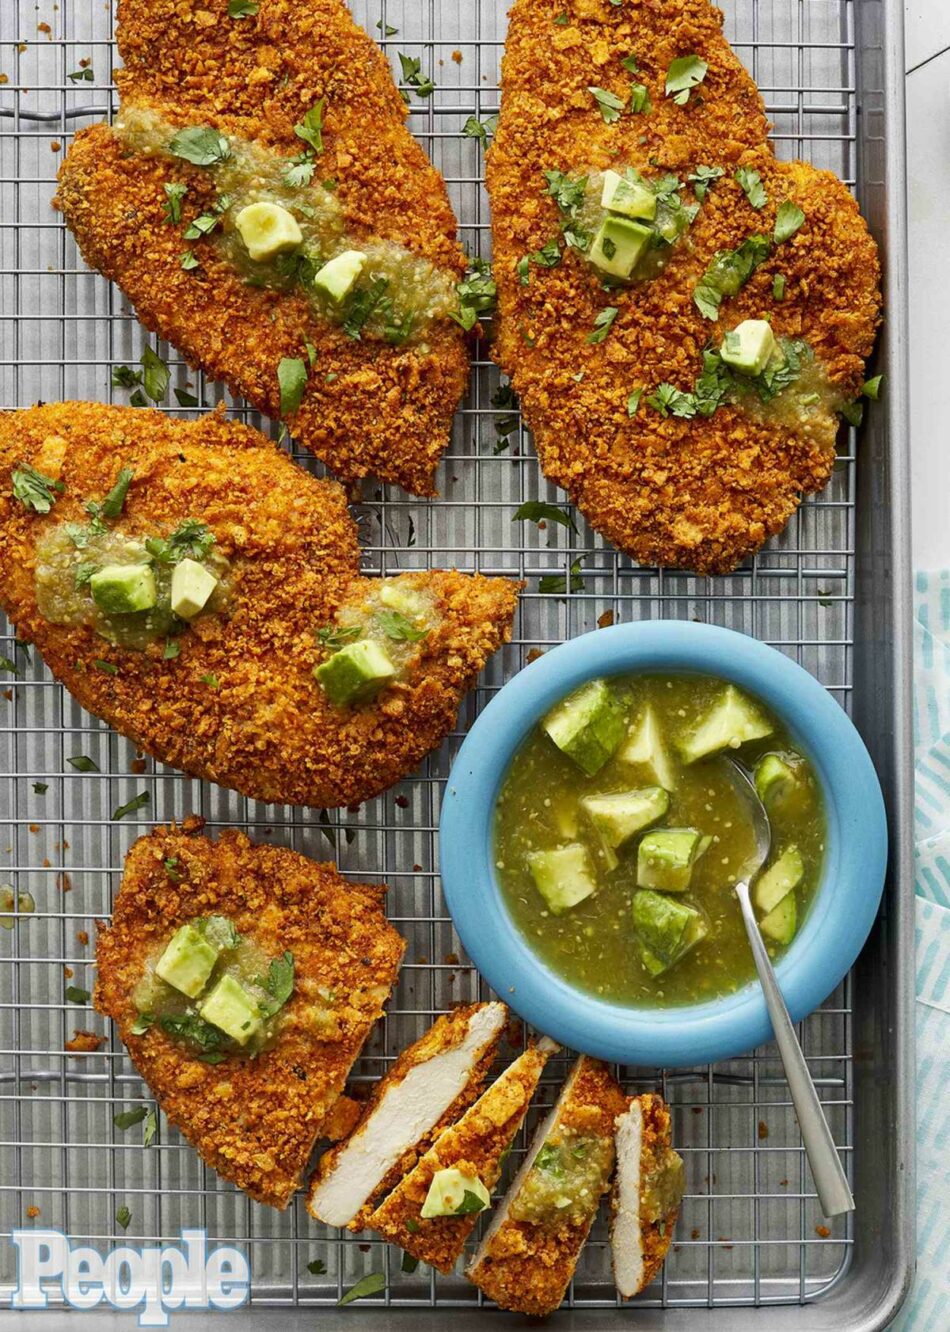 These Baked Chicken Breasts Are Breaded in Corn Chips—Get the Recipe